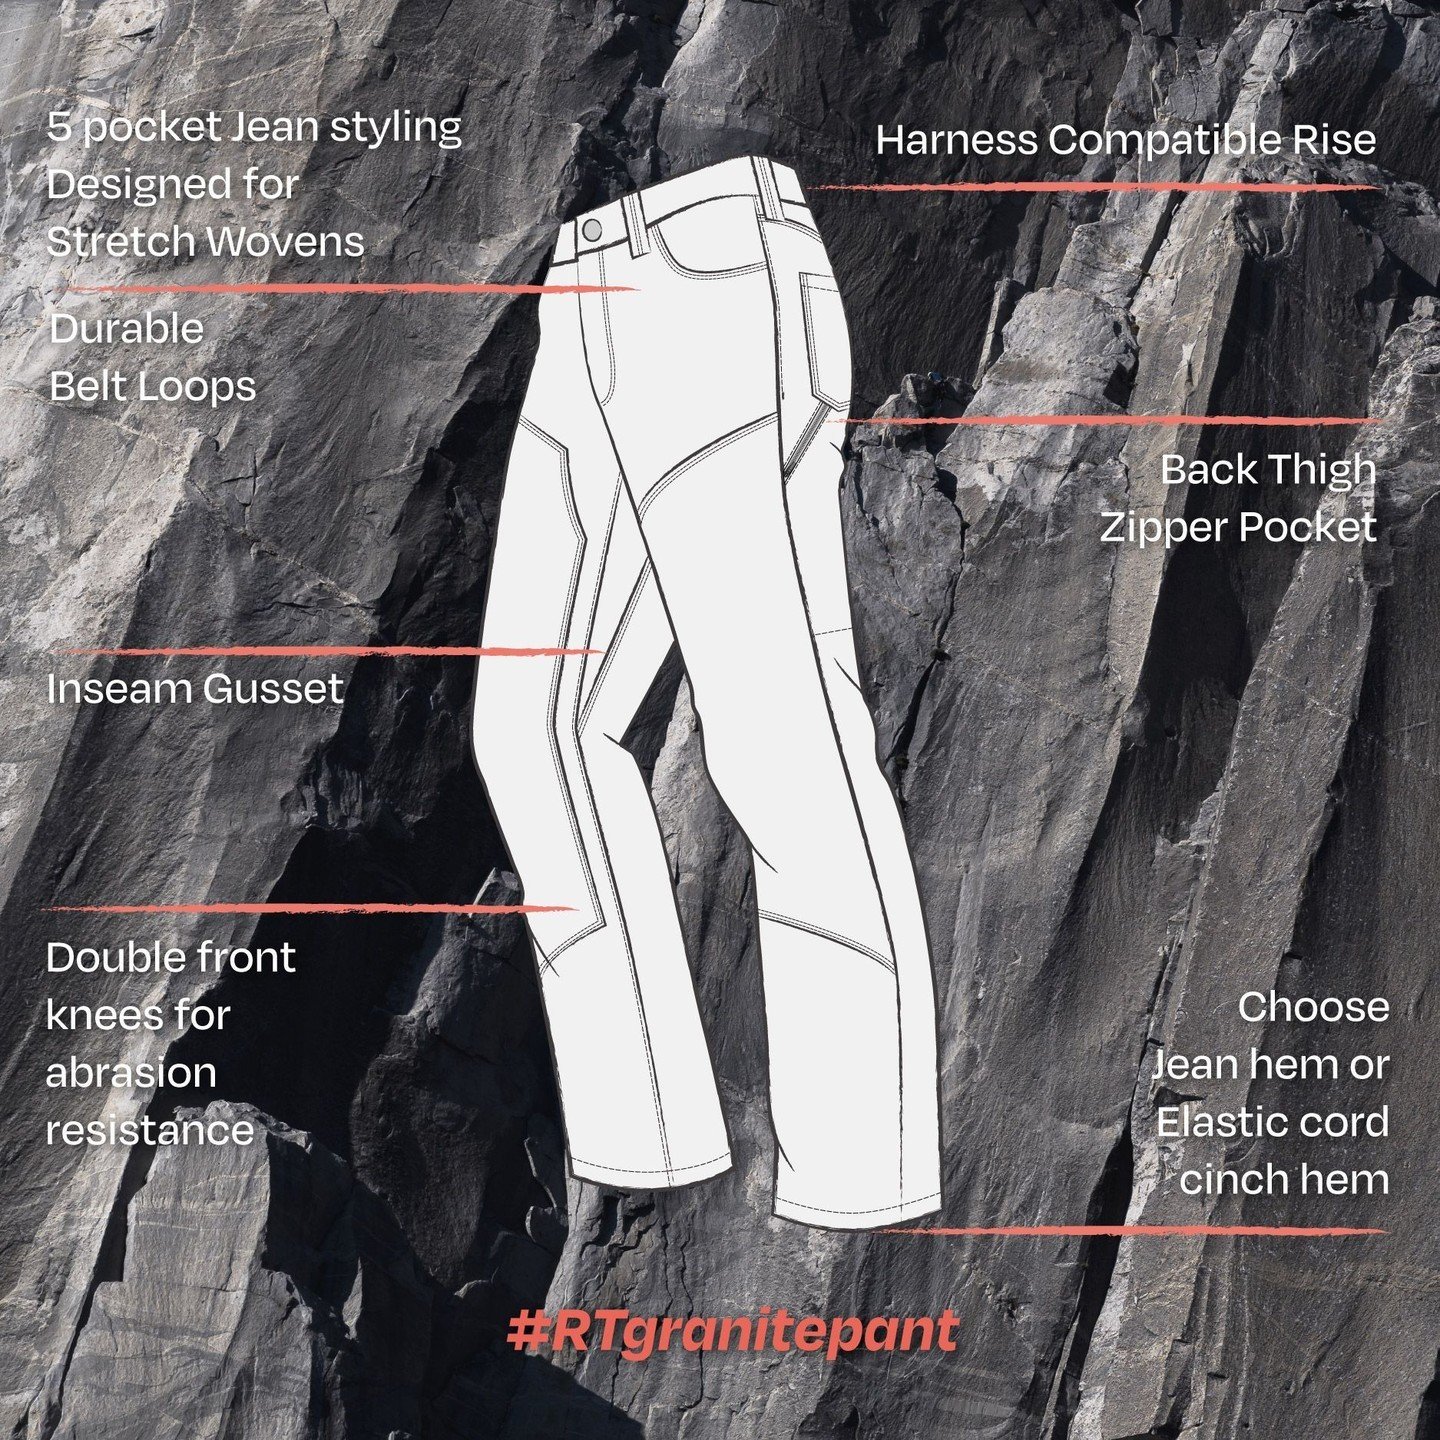 Ever wanted to make your own hiking pants?! The #RTgranitepants are designed for style AND function. Based off of a traditional 5 pocket jean silhouette, these sew up beautifully in a stretch denim or a midnight technical hiking pant fabric. 

Featur